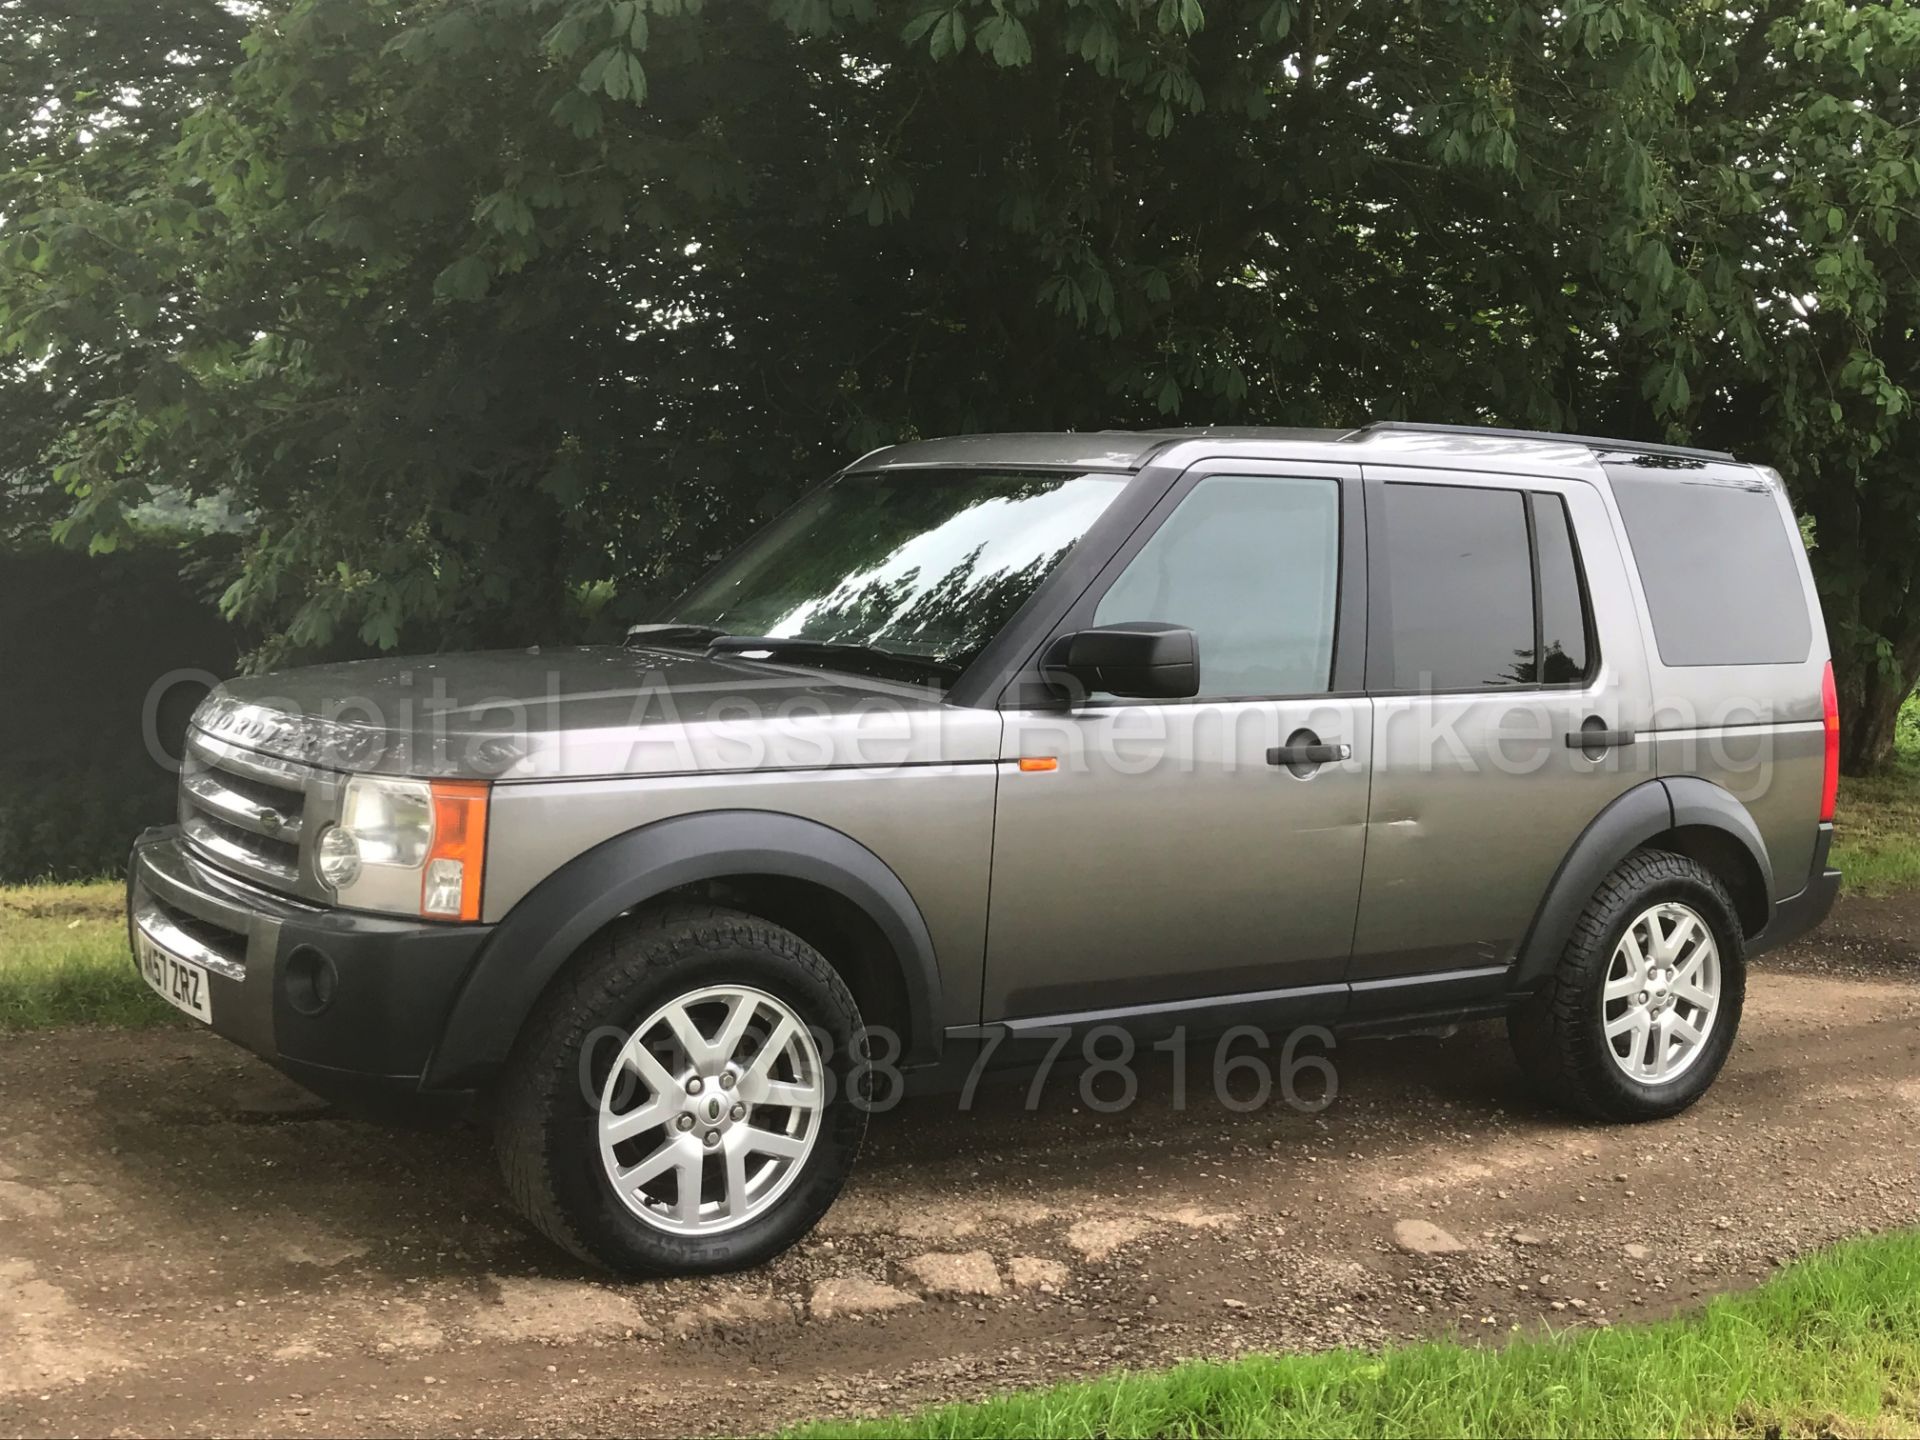 (On Sale) LAND ROVER DISCOVERY 3 'XS EDITION' **COMMERCIAL VAN**(2008 MODEL) 'TDV6-190 BHP' (NO VAT) - Image 6 of 38